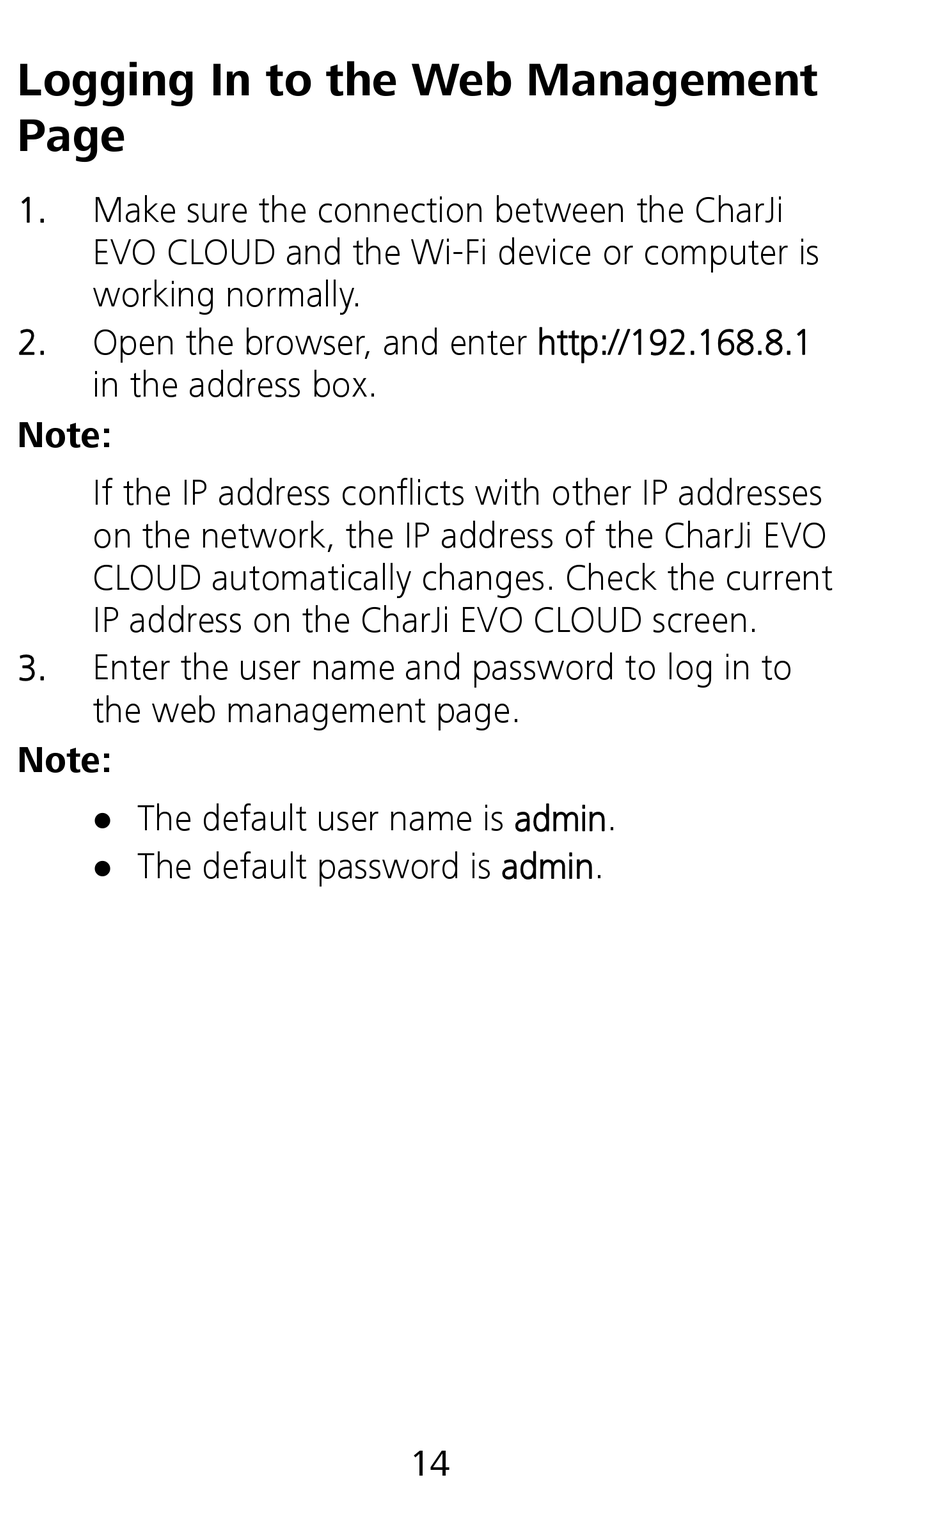 Logging In To The Web Management Page - CharJi EVO CLOUD ...